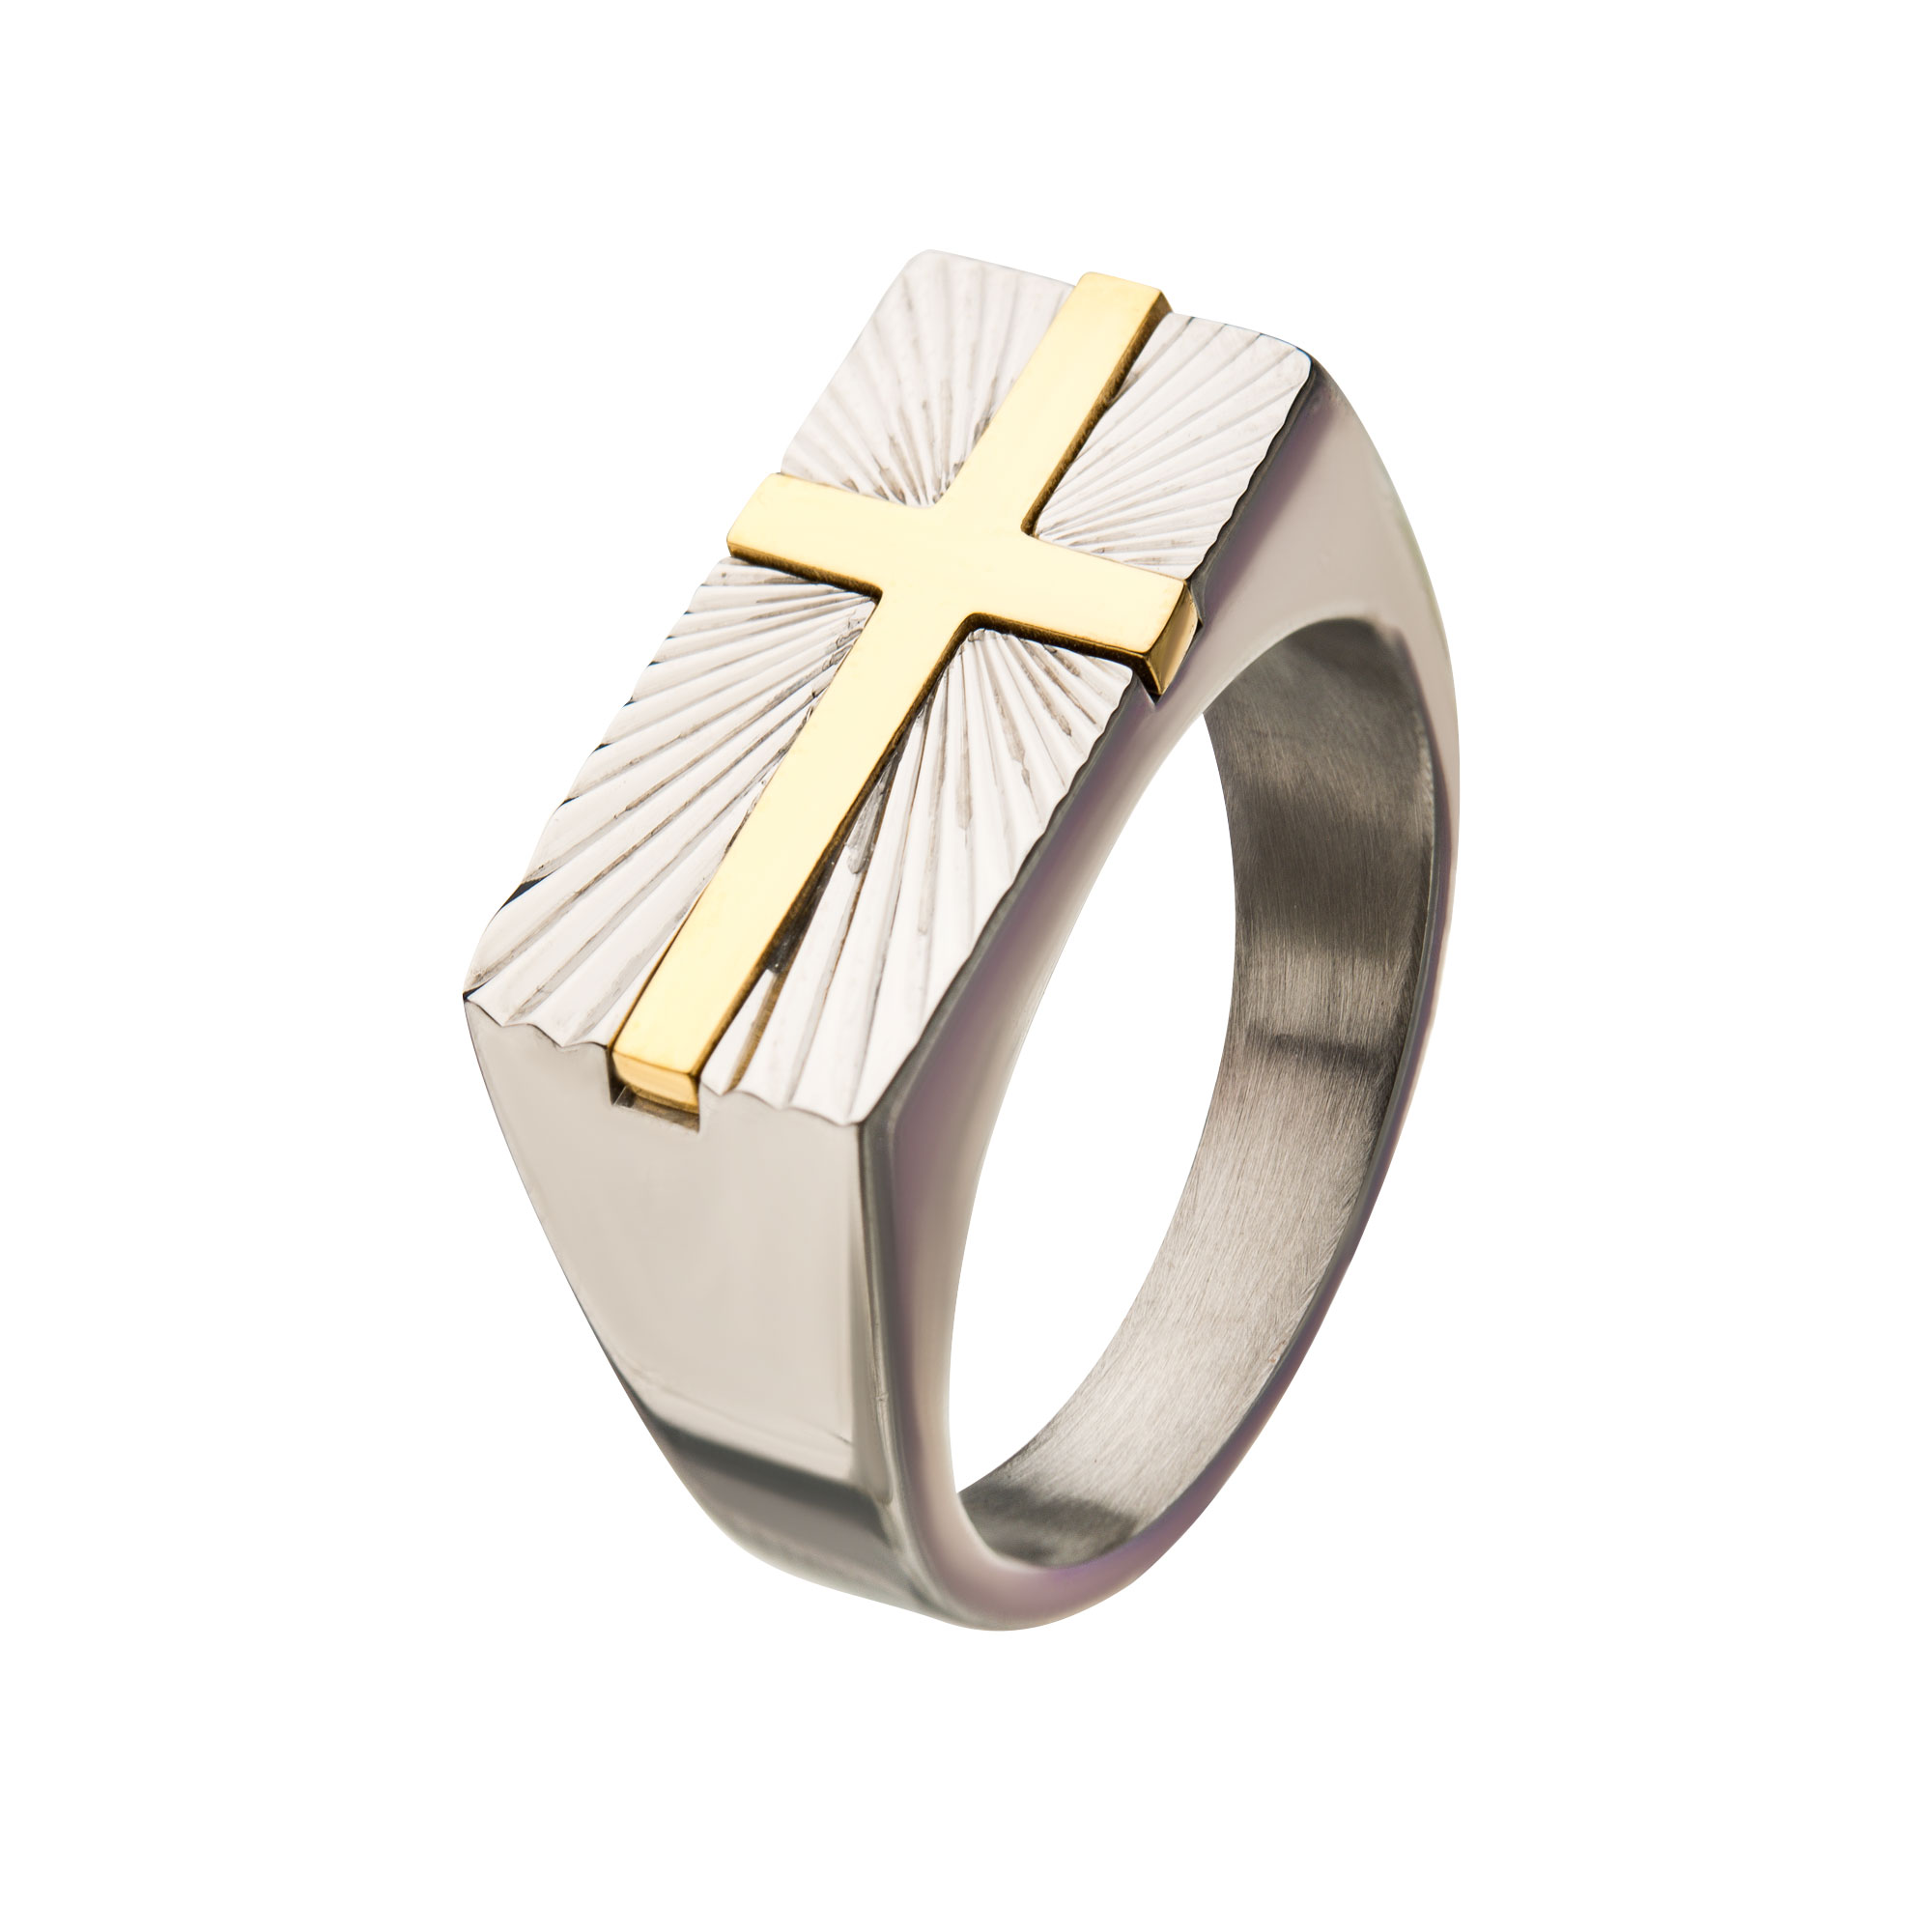 Stainless Steel with  Gold Plated Transfiguration Cross Ring Midtown Diamonds Reno, NV